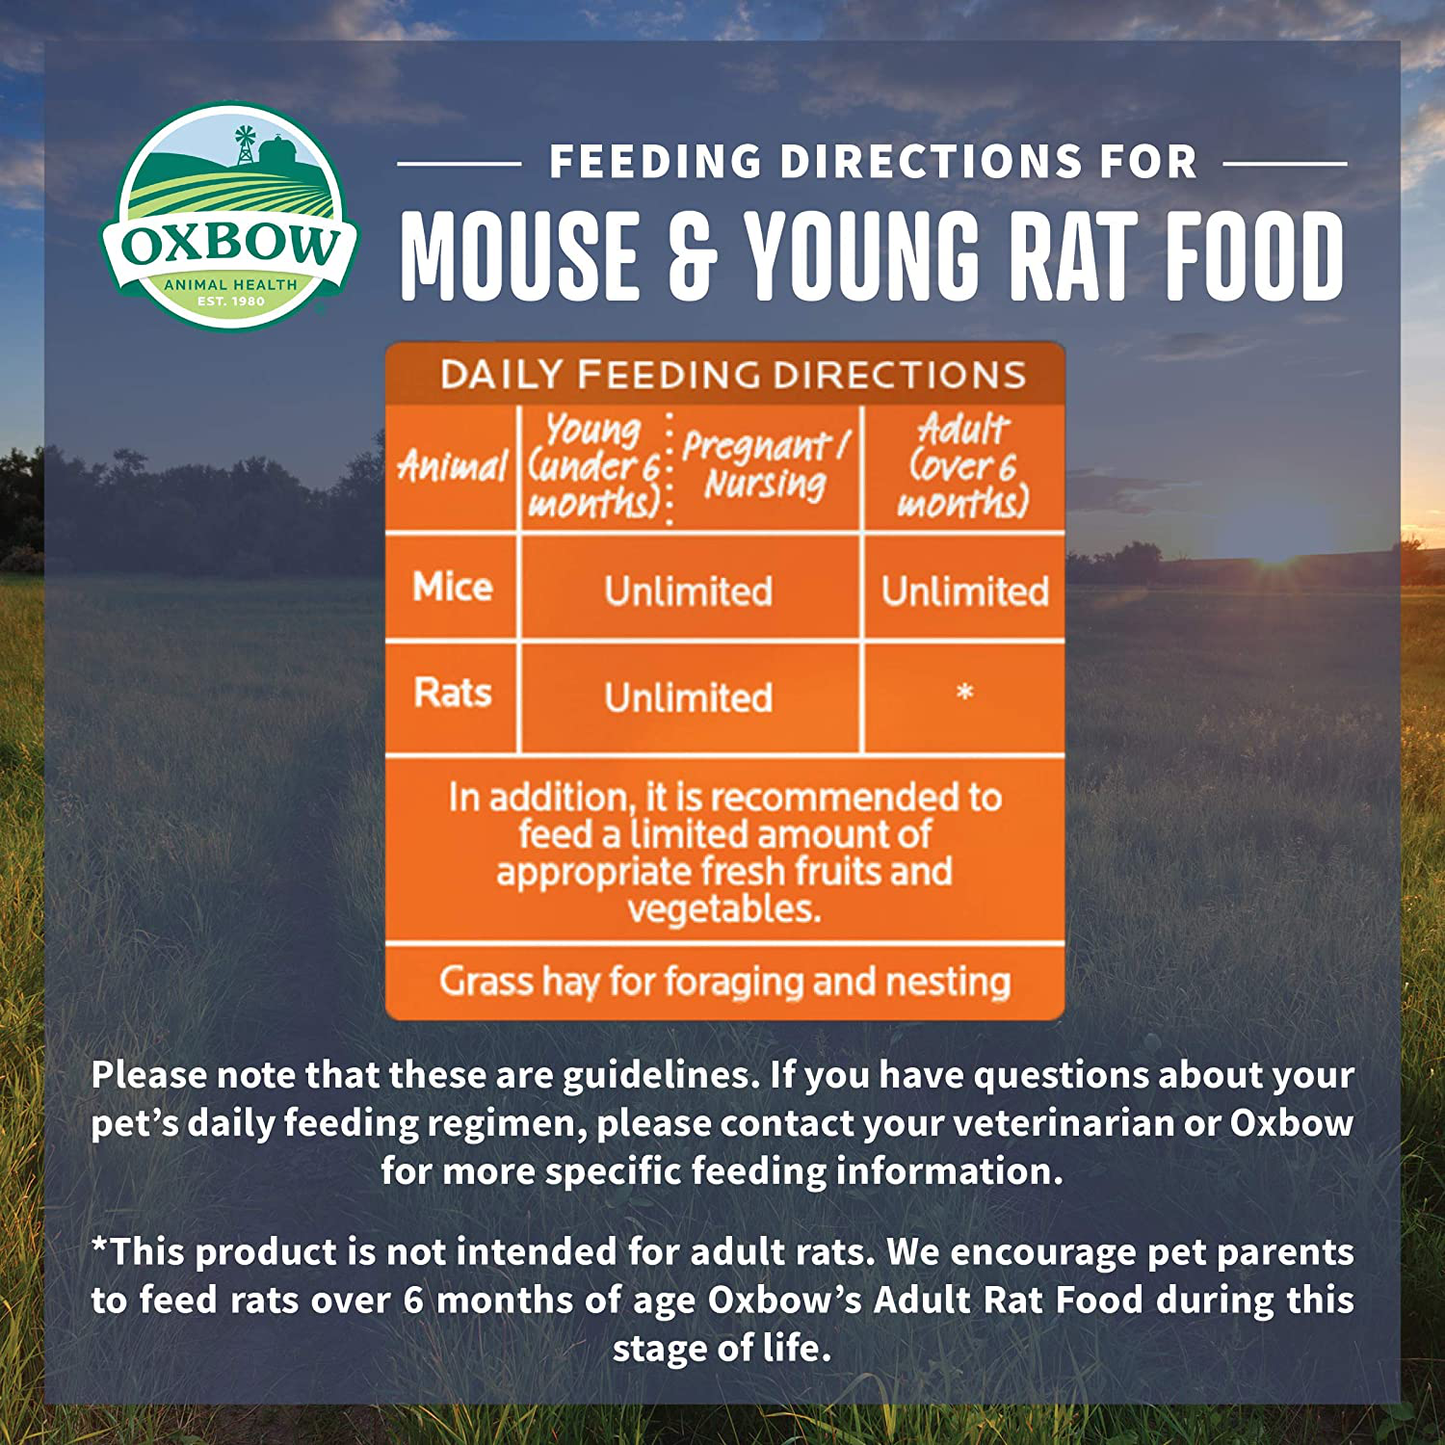 Oxbow Animal Health Garden Select Mouse and Young Rat Food, Garden-Inspired Recipe for Young Rats and Mice of All Ages, Non-Gmo, Made in the USA, 20 Pound Bag